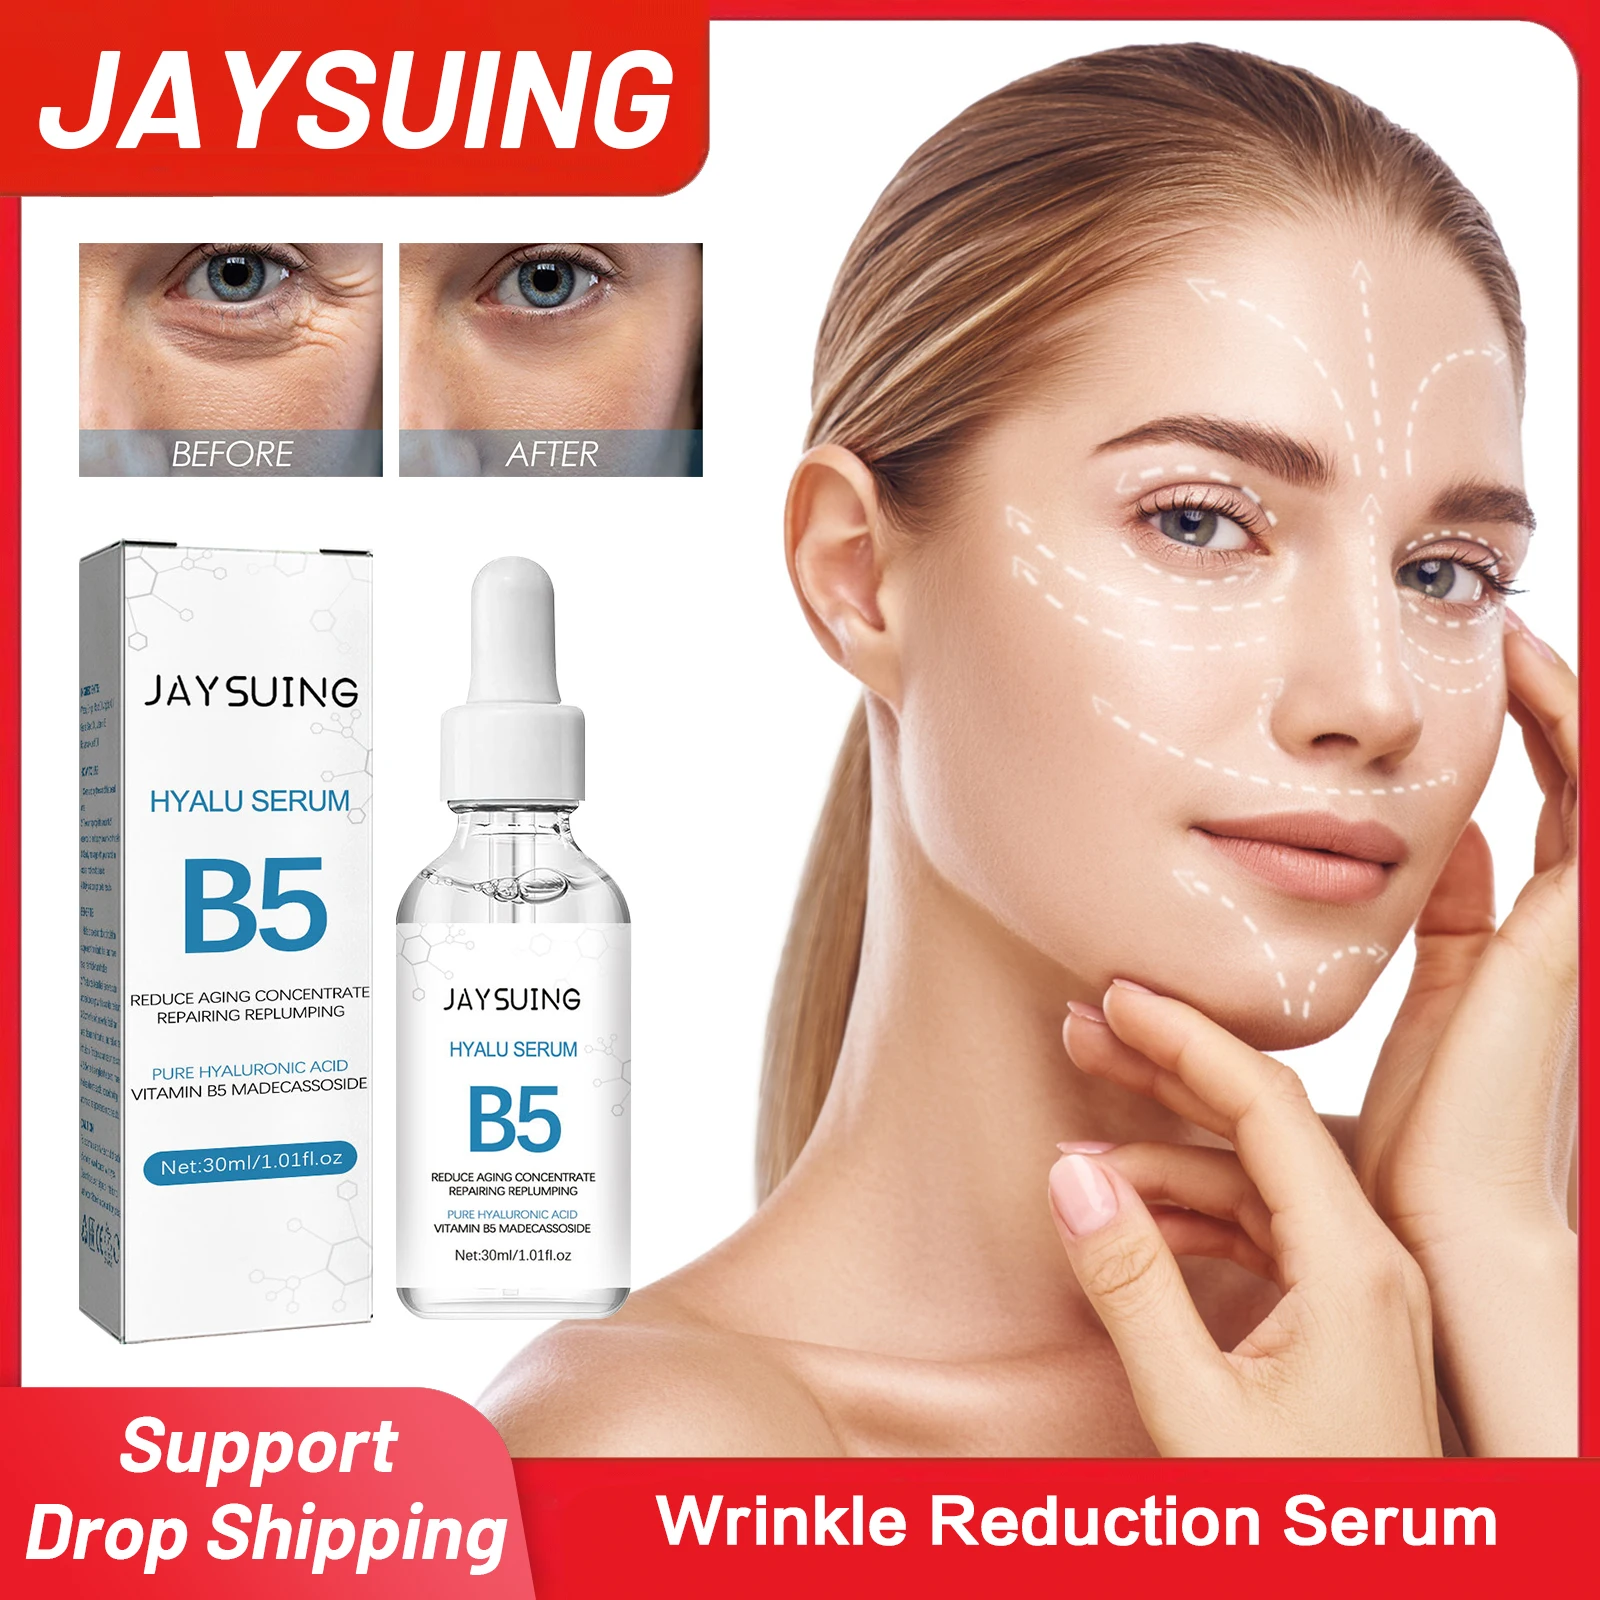 

Wrinkle Reduction Serum Nourishing Moisturizing Against Fine Lines Delay Aging Tightening Firming Hyaluronic Acid Facial Essence